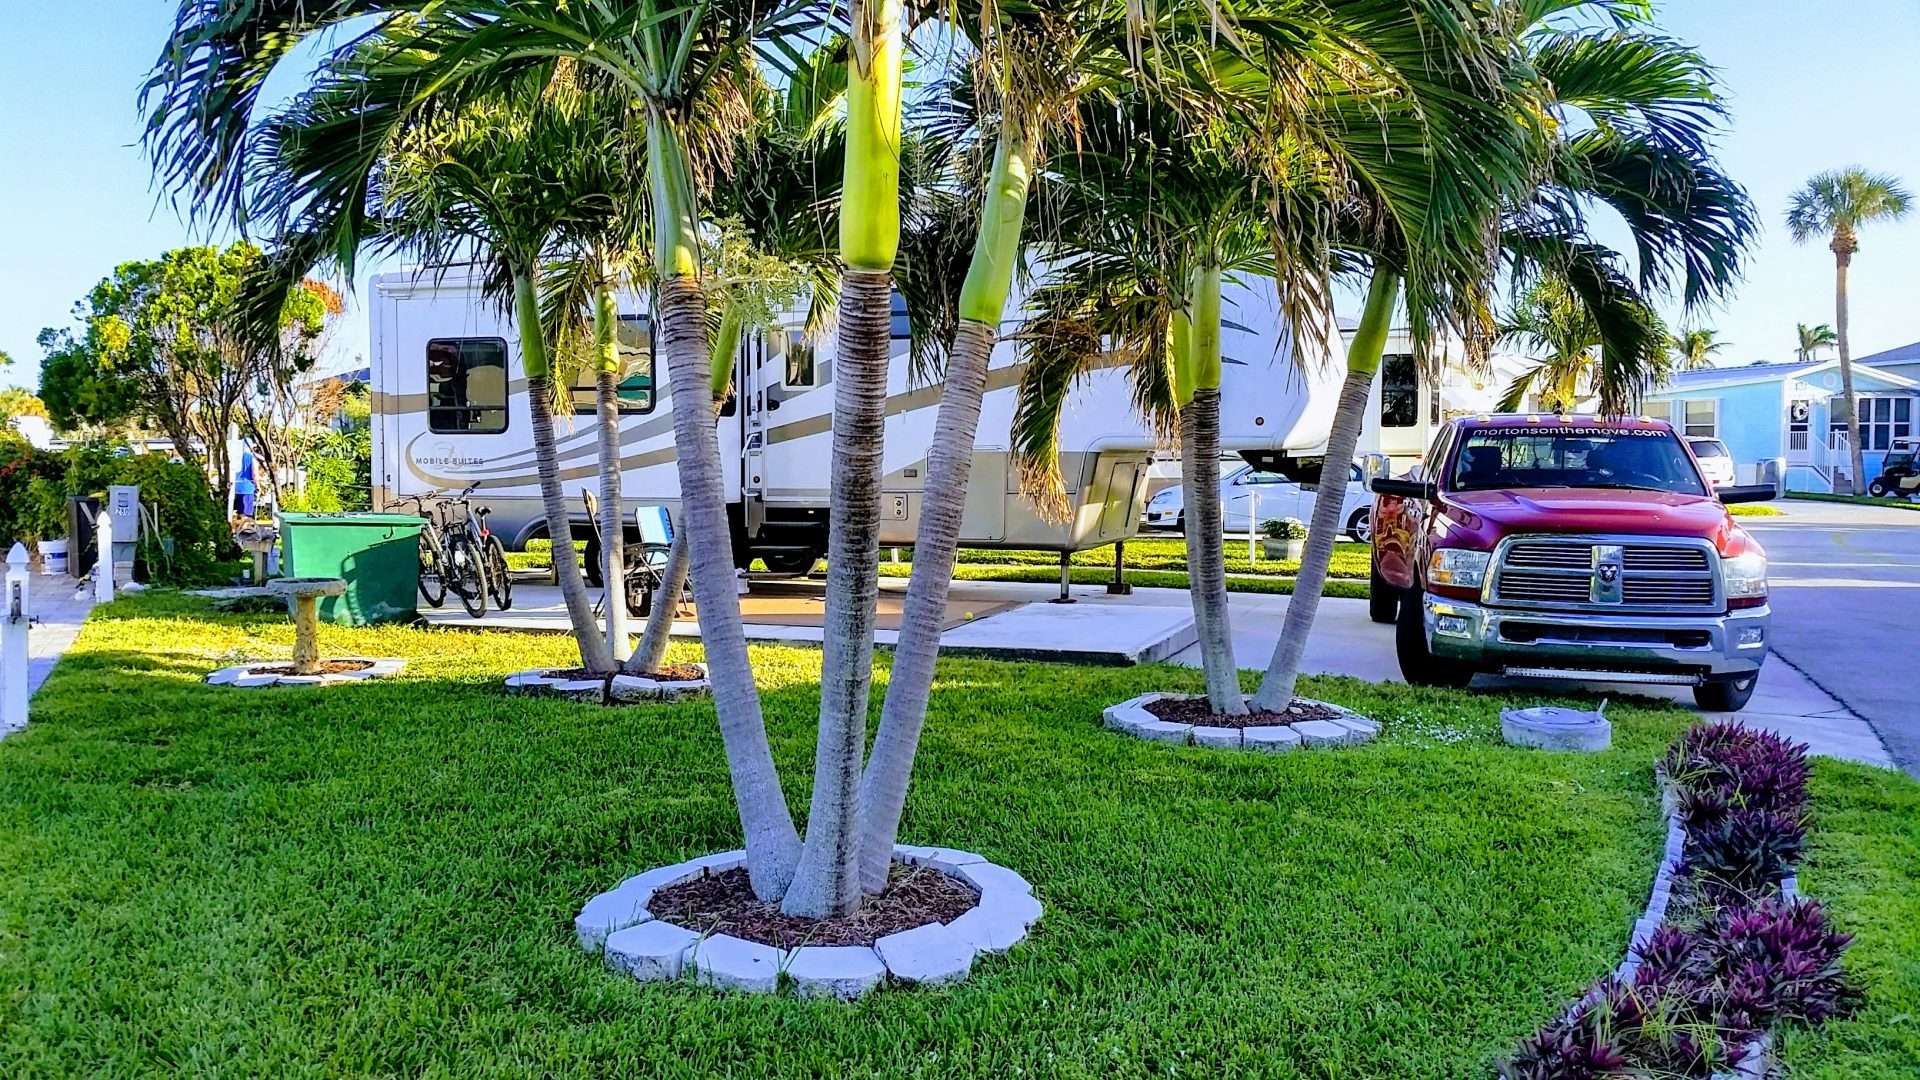 RV parked at campsite in Florida.